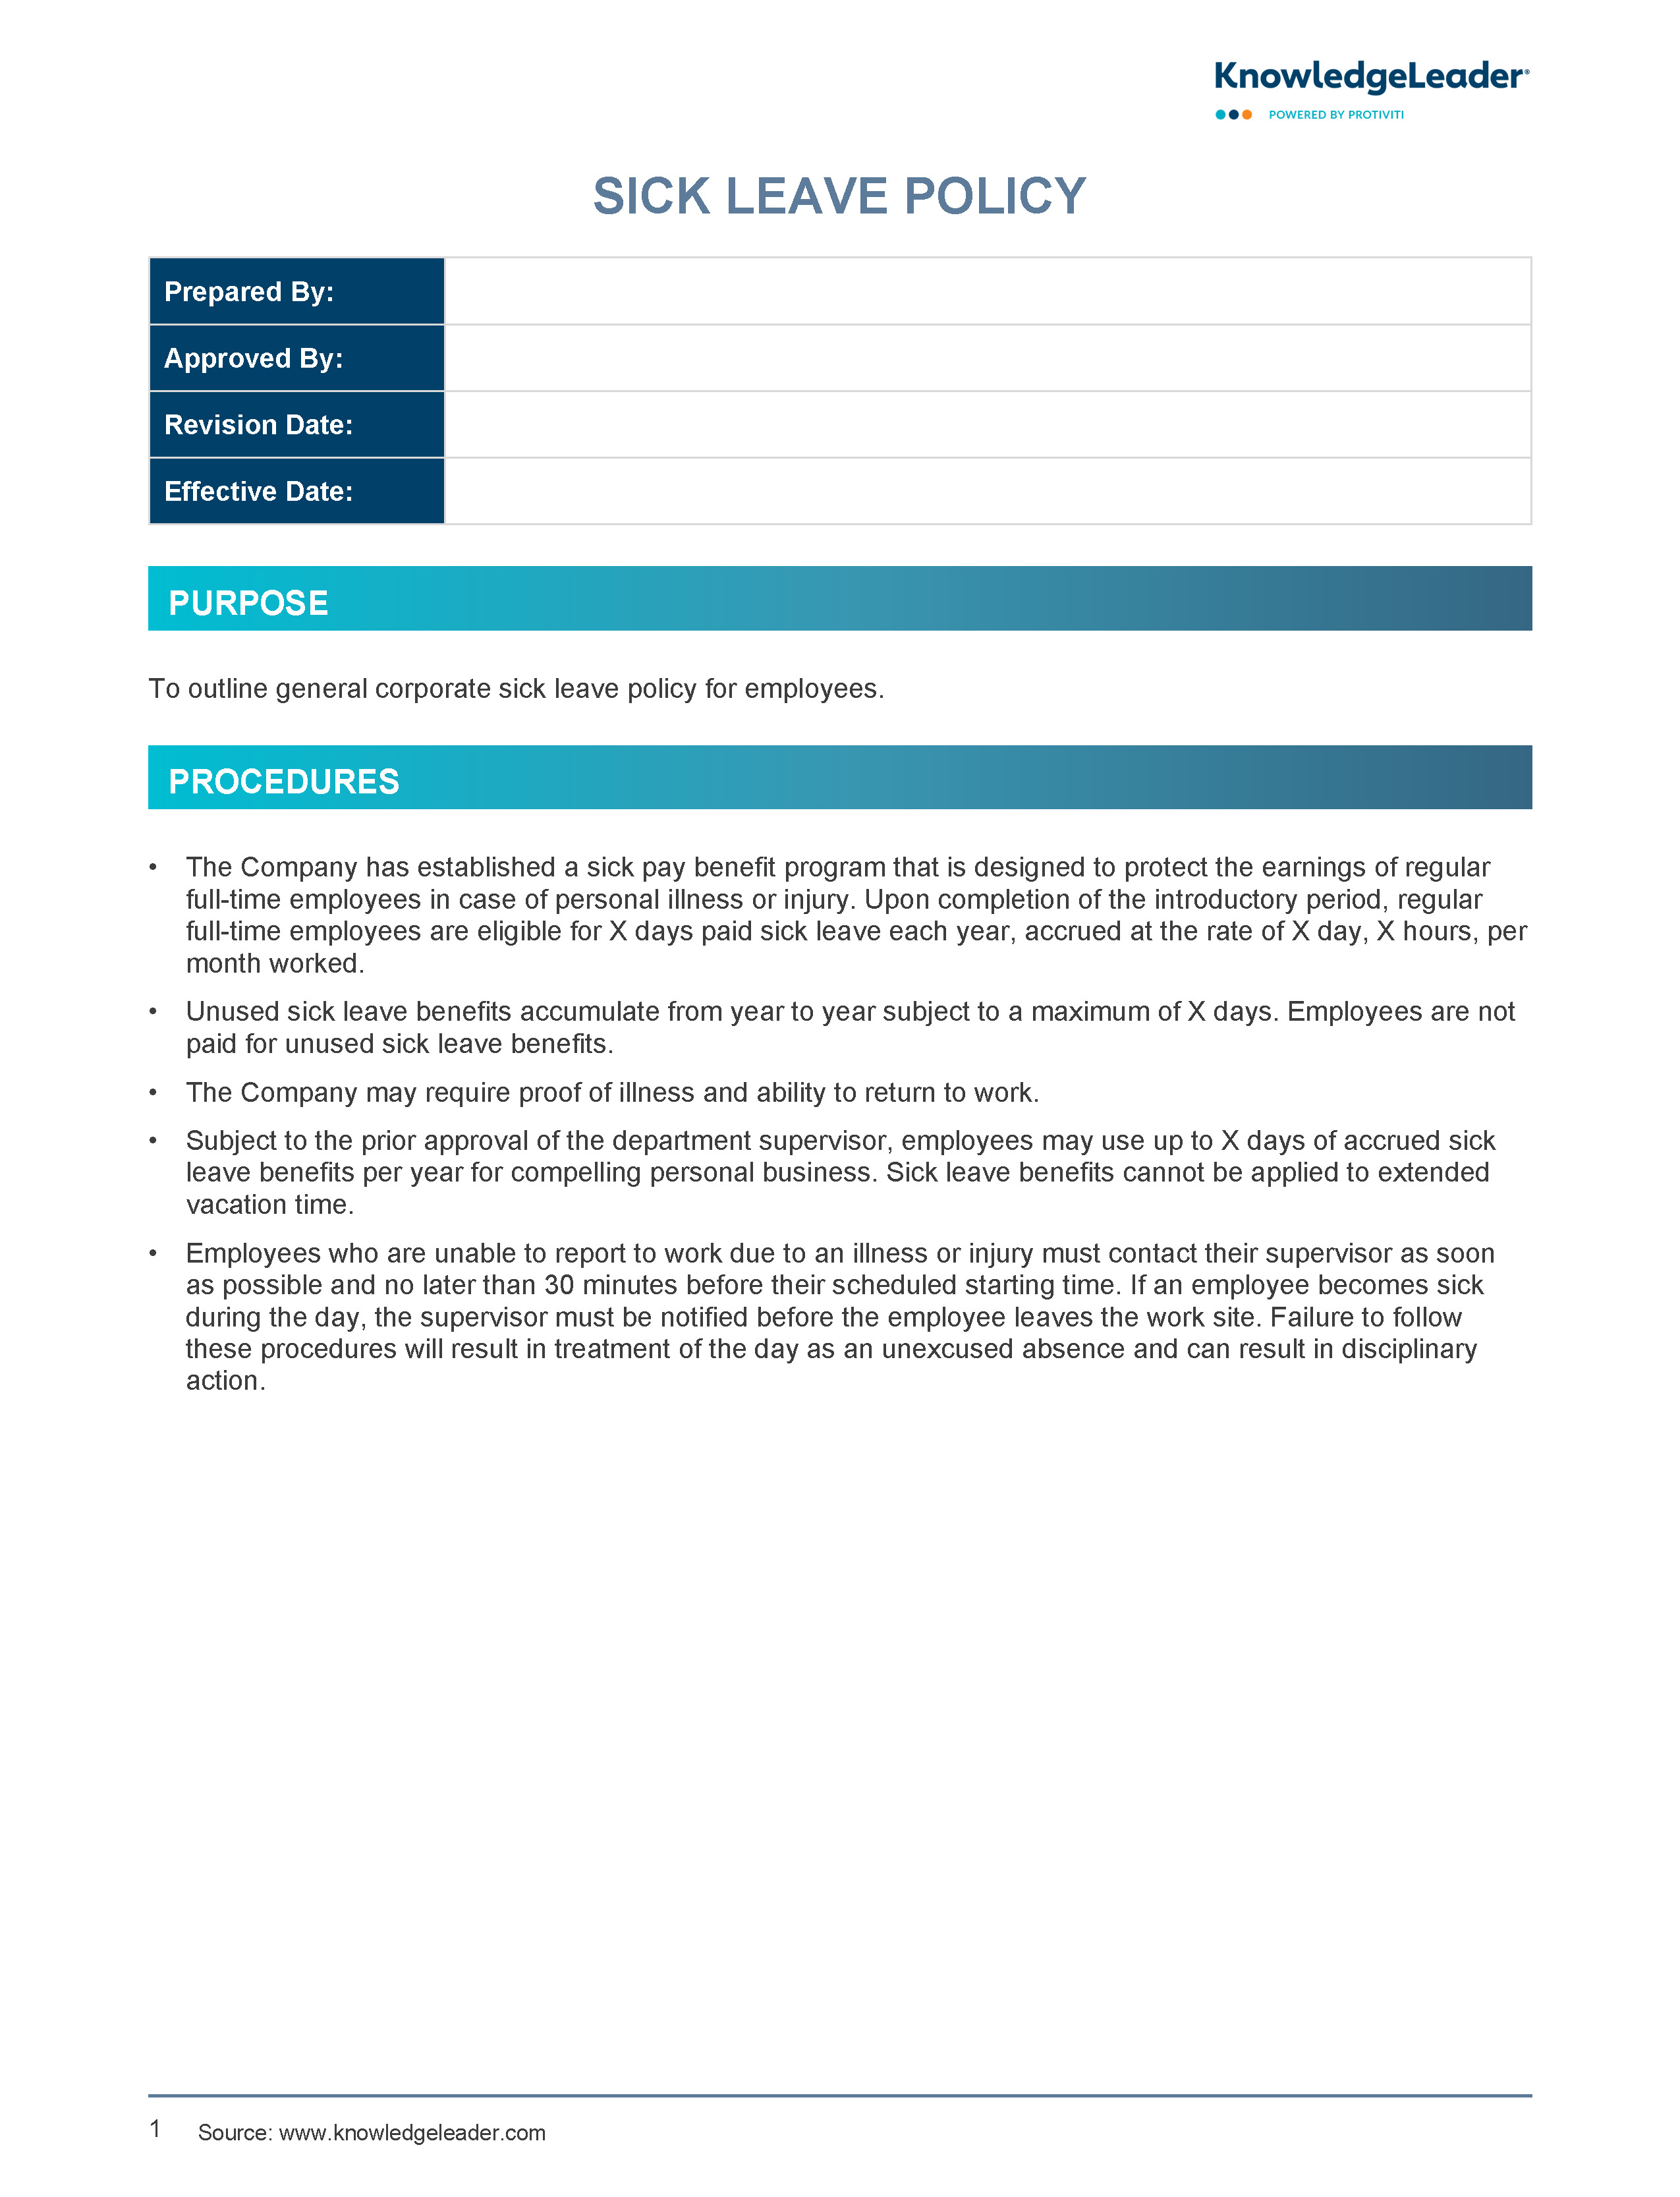 Screenshot of the first page of Sick Leave Policy